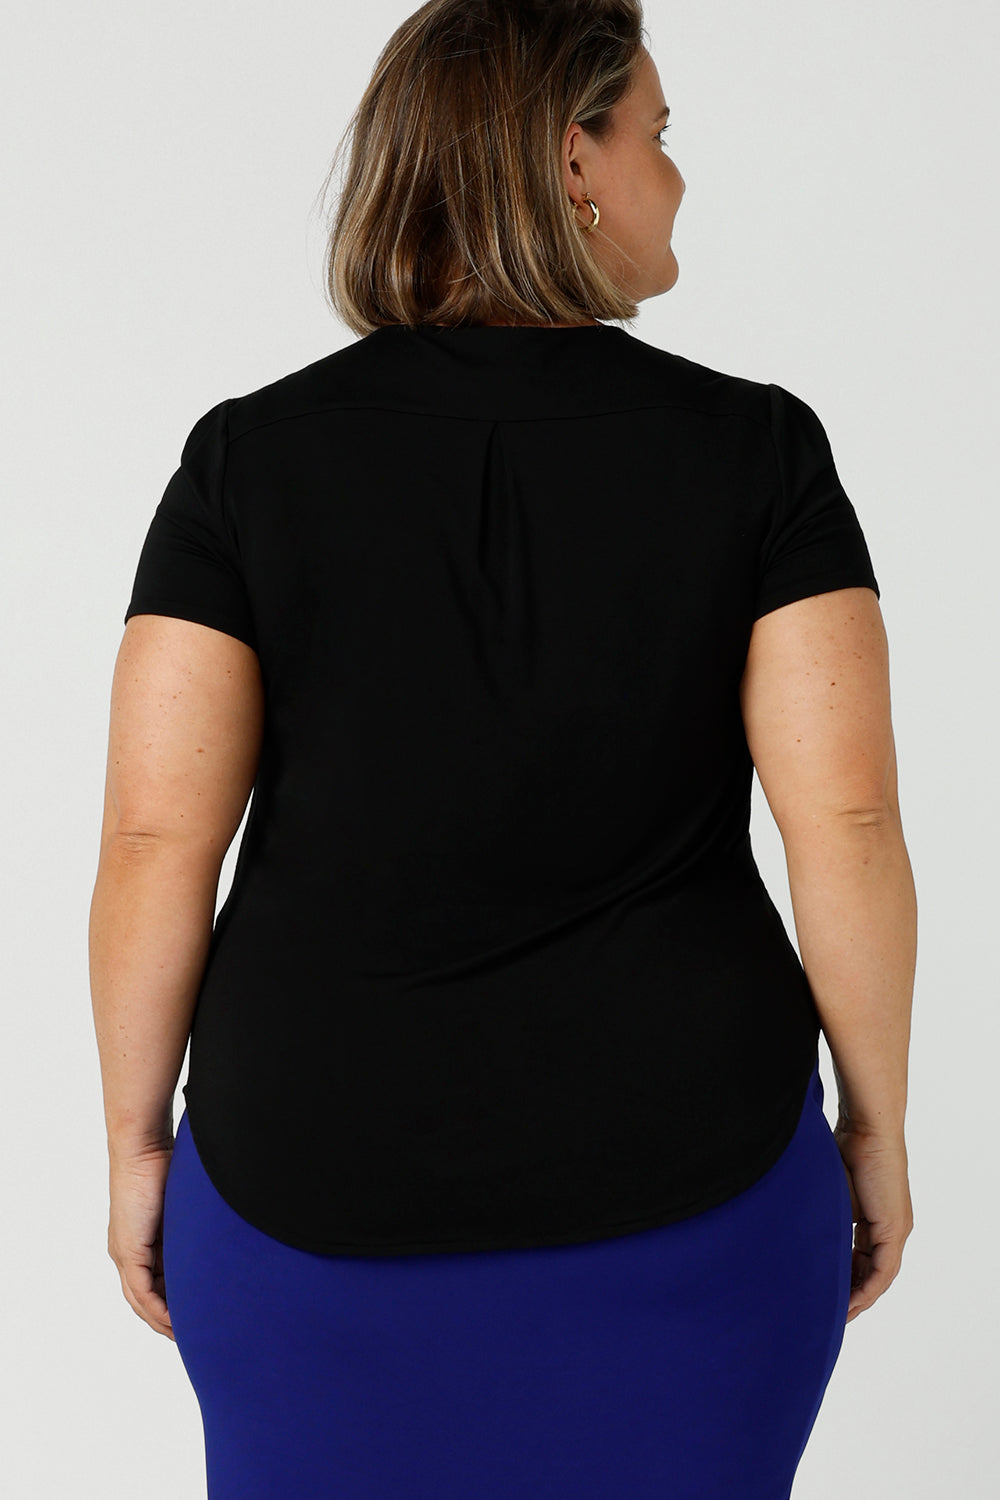 Back view of the shoulder yoke and back pleat of a black bamboo jersey top by Australian and New Zealand fashion brand, Leina & Fleur. A good plus size top, this round neck, short sleeve top in black bamboo jersey is comfortable for work and casual wear. Made in Australia by ladies clothing brand, Leina & Fleur, shop black tops for women online in sizes 8 to 24 in L&F's online fashion boutique.